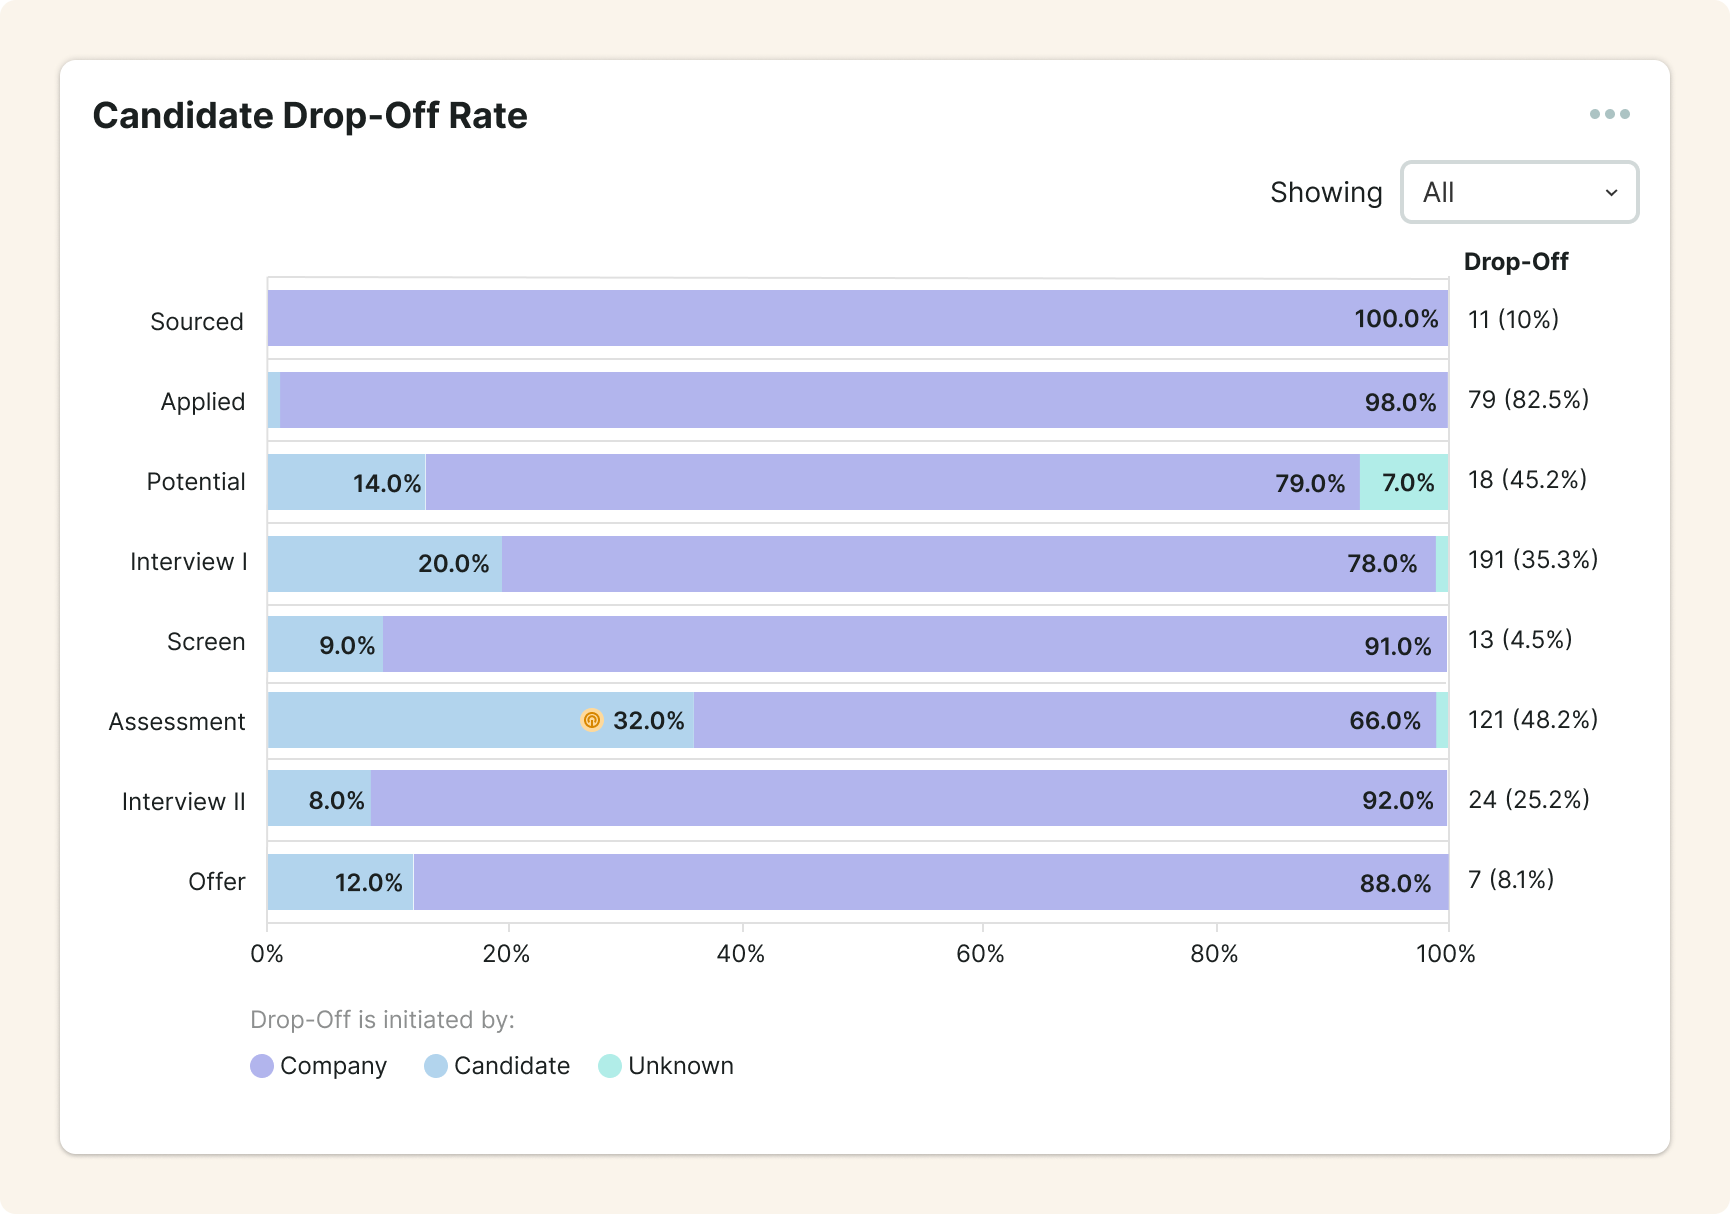 Candidate Drop-Off Rate